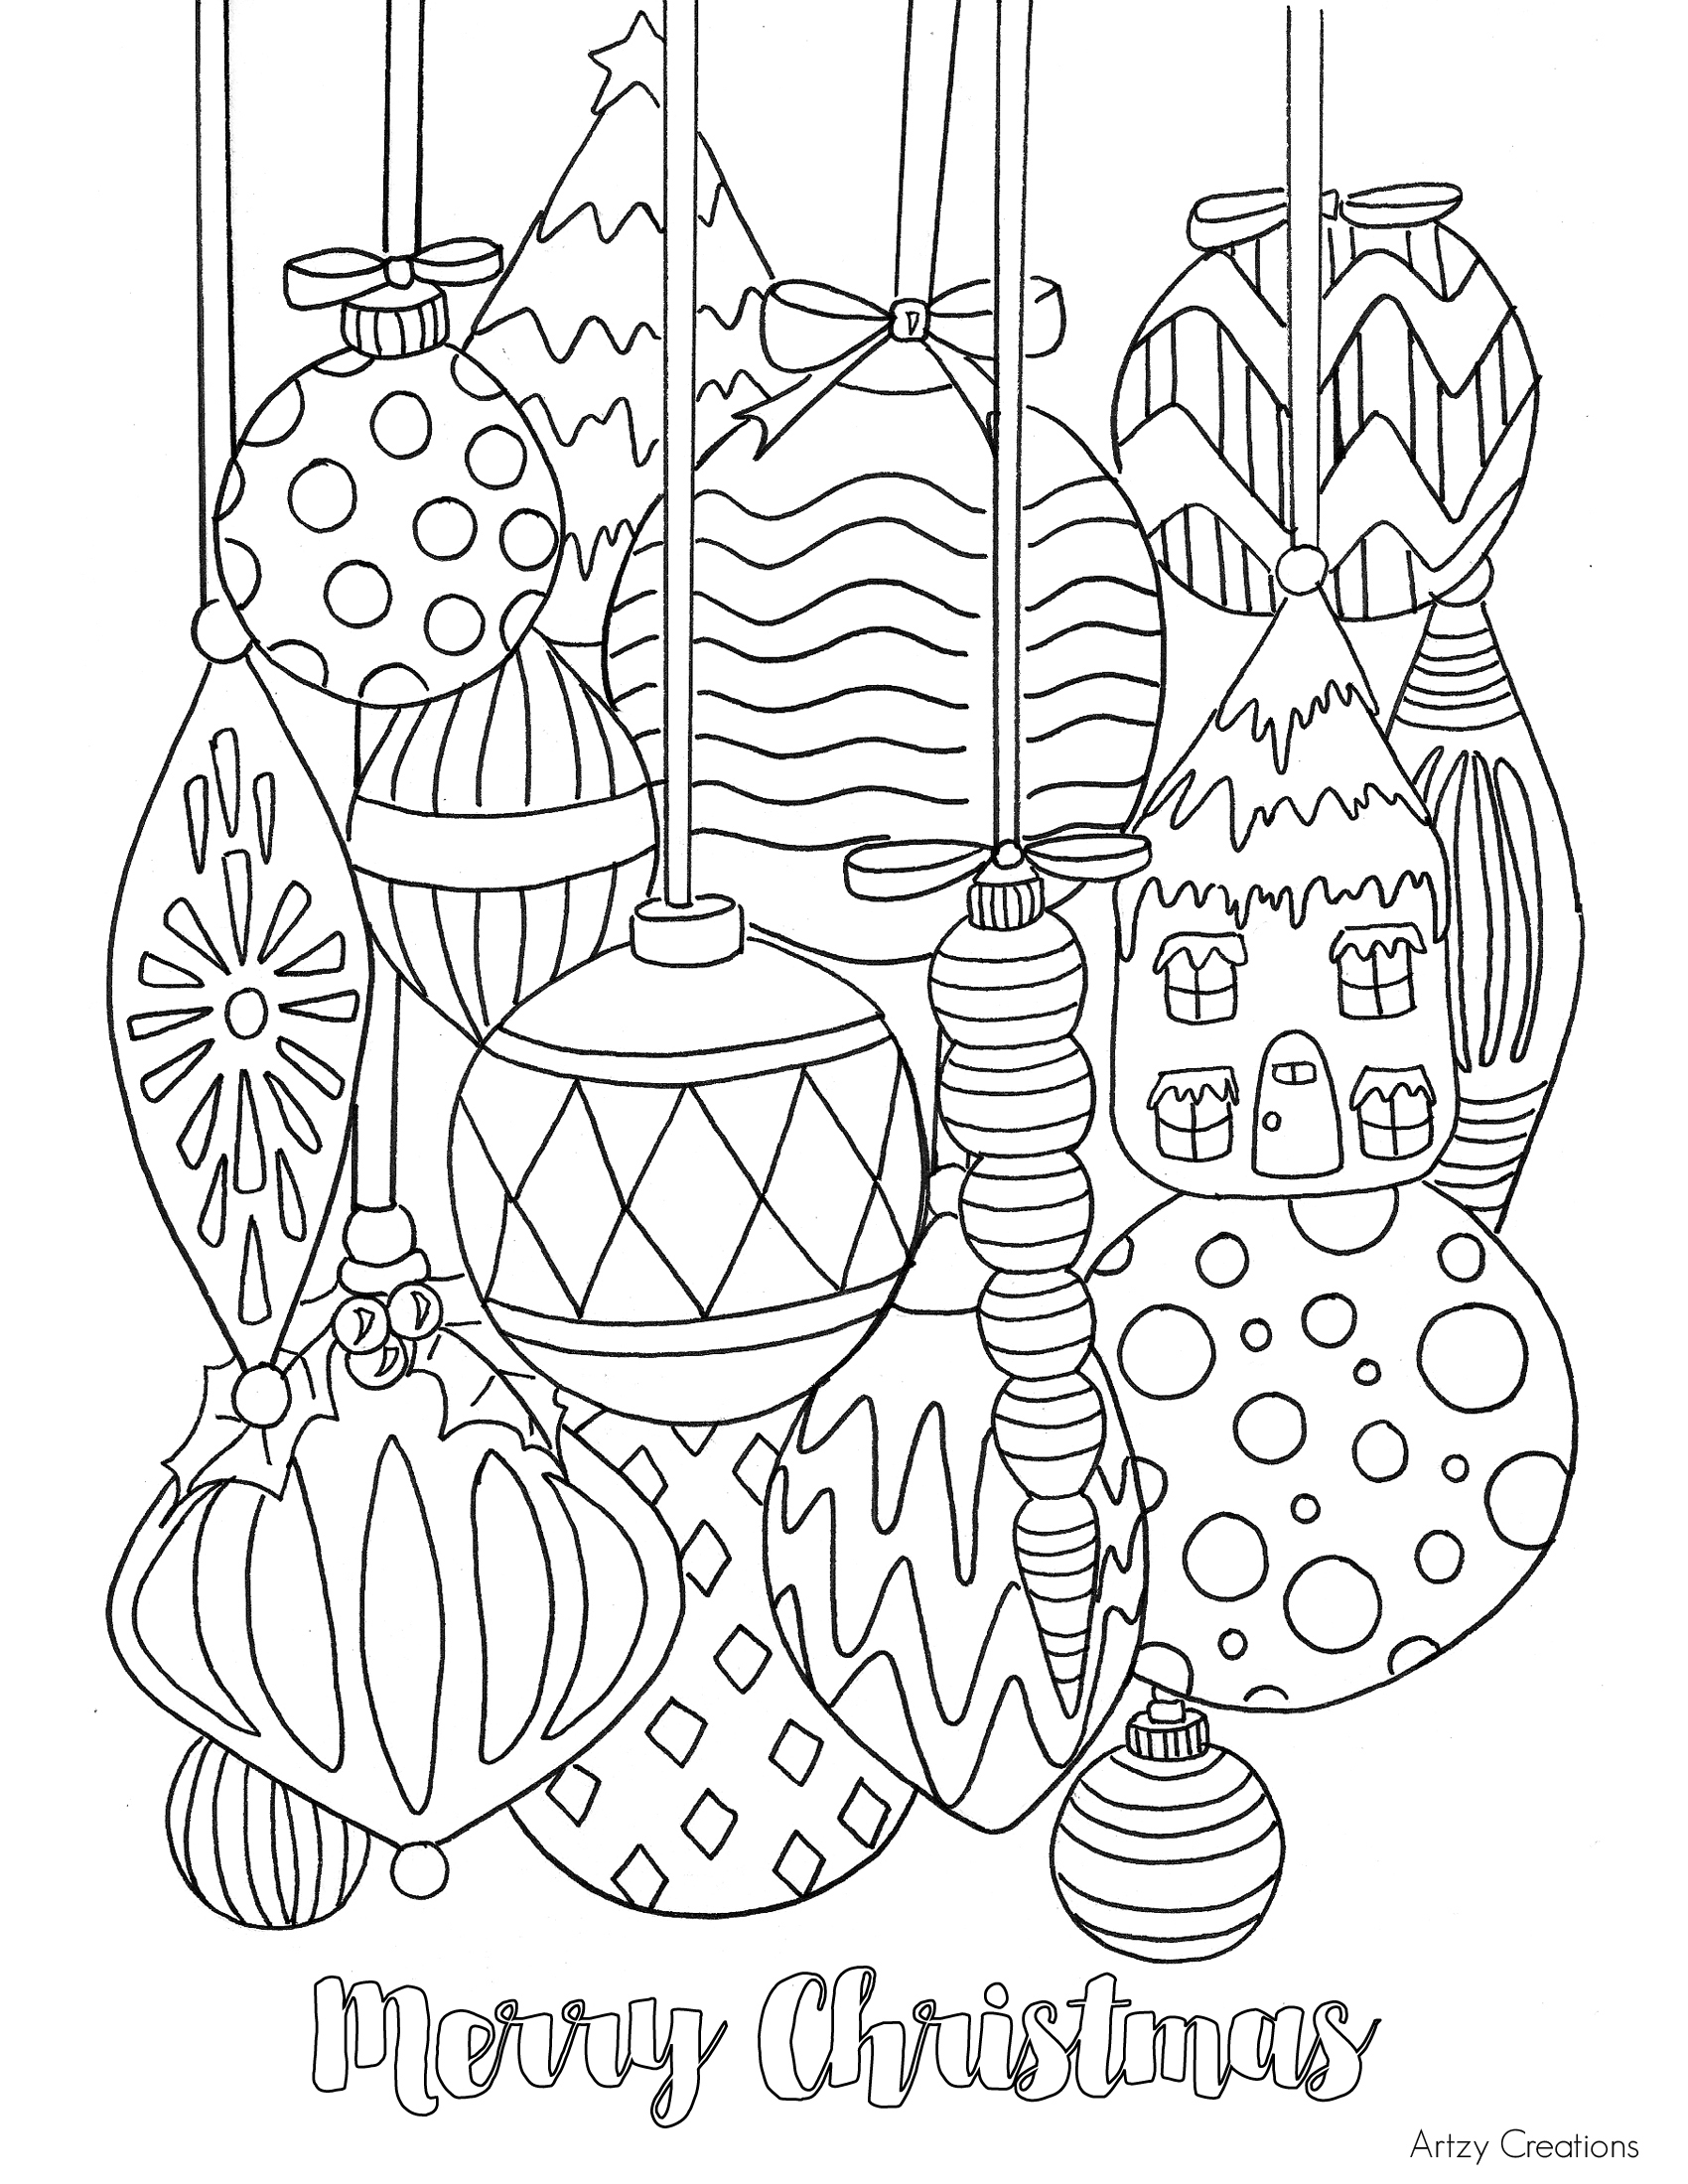 Free Christmas Printable Coloring Pages Snowflake Coloring Pages To Print Download Printable Coloring Pages